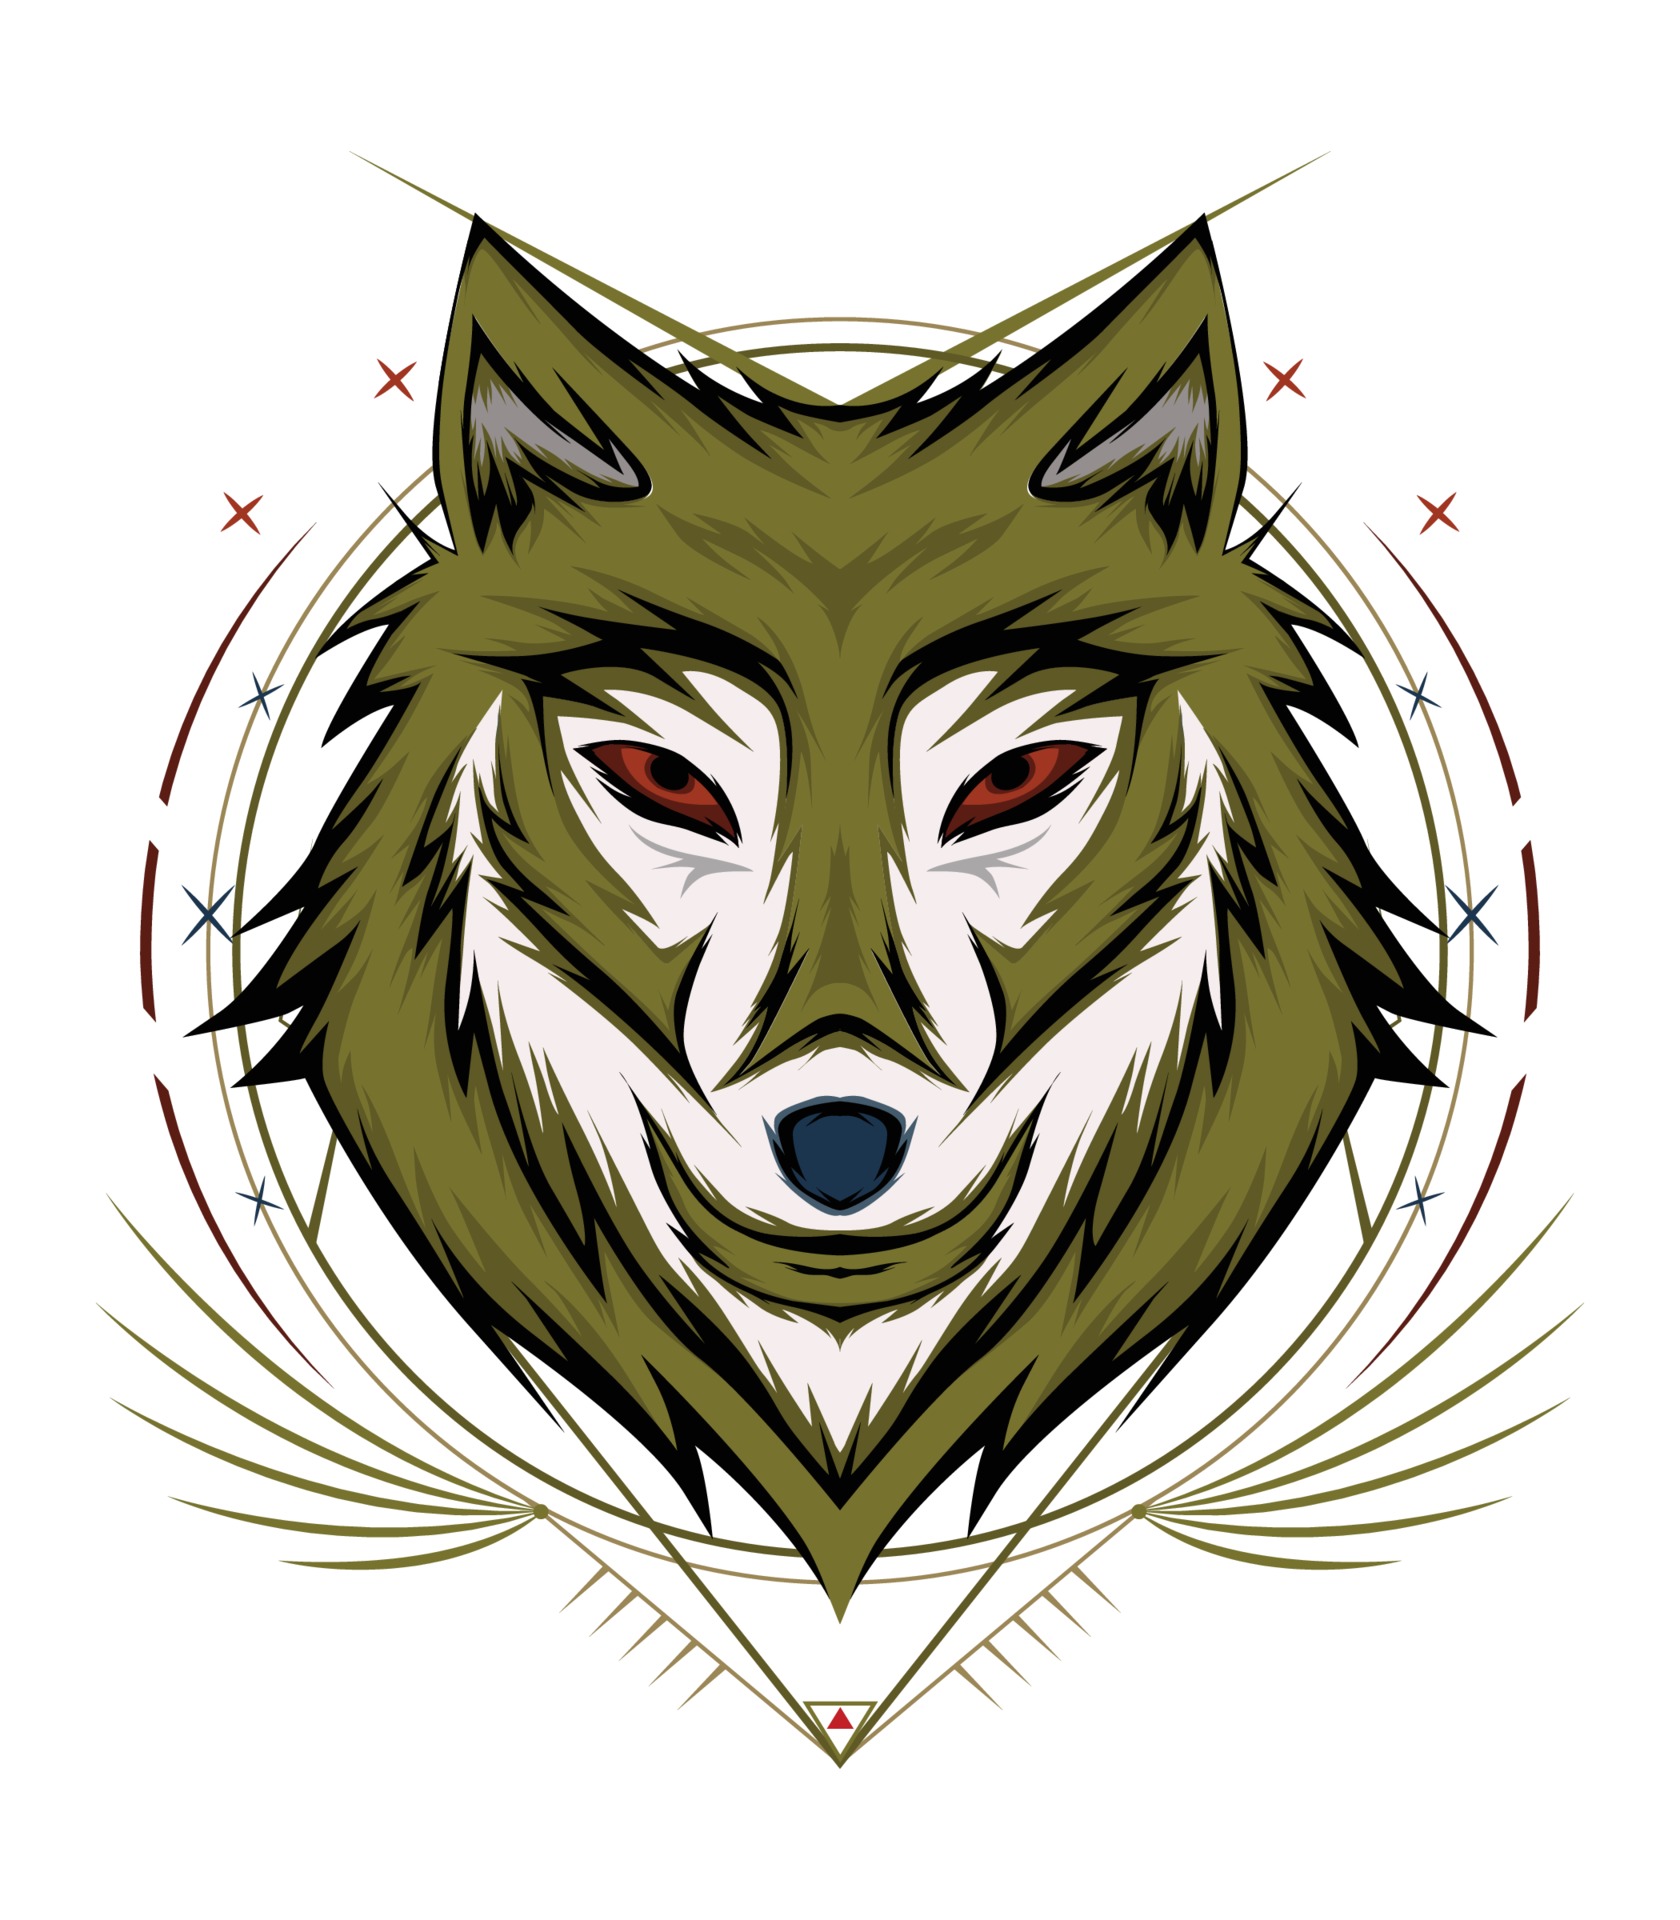 Wolf Face Logo Design Wolf Mascot Frontal Symmetric Image Of Wolf